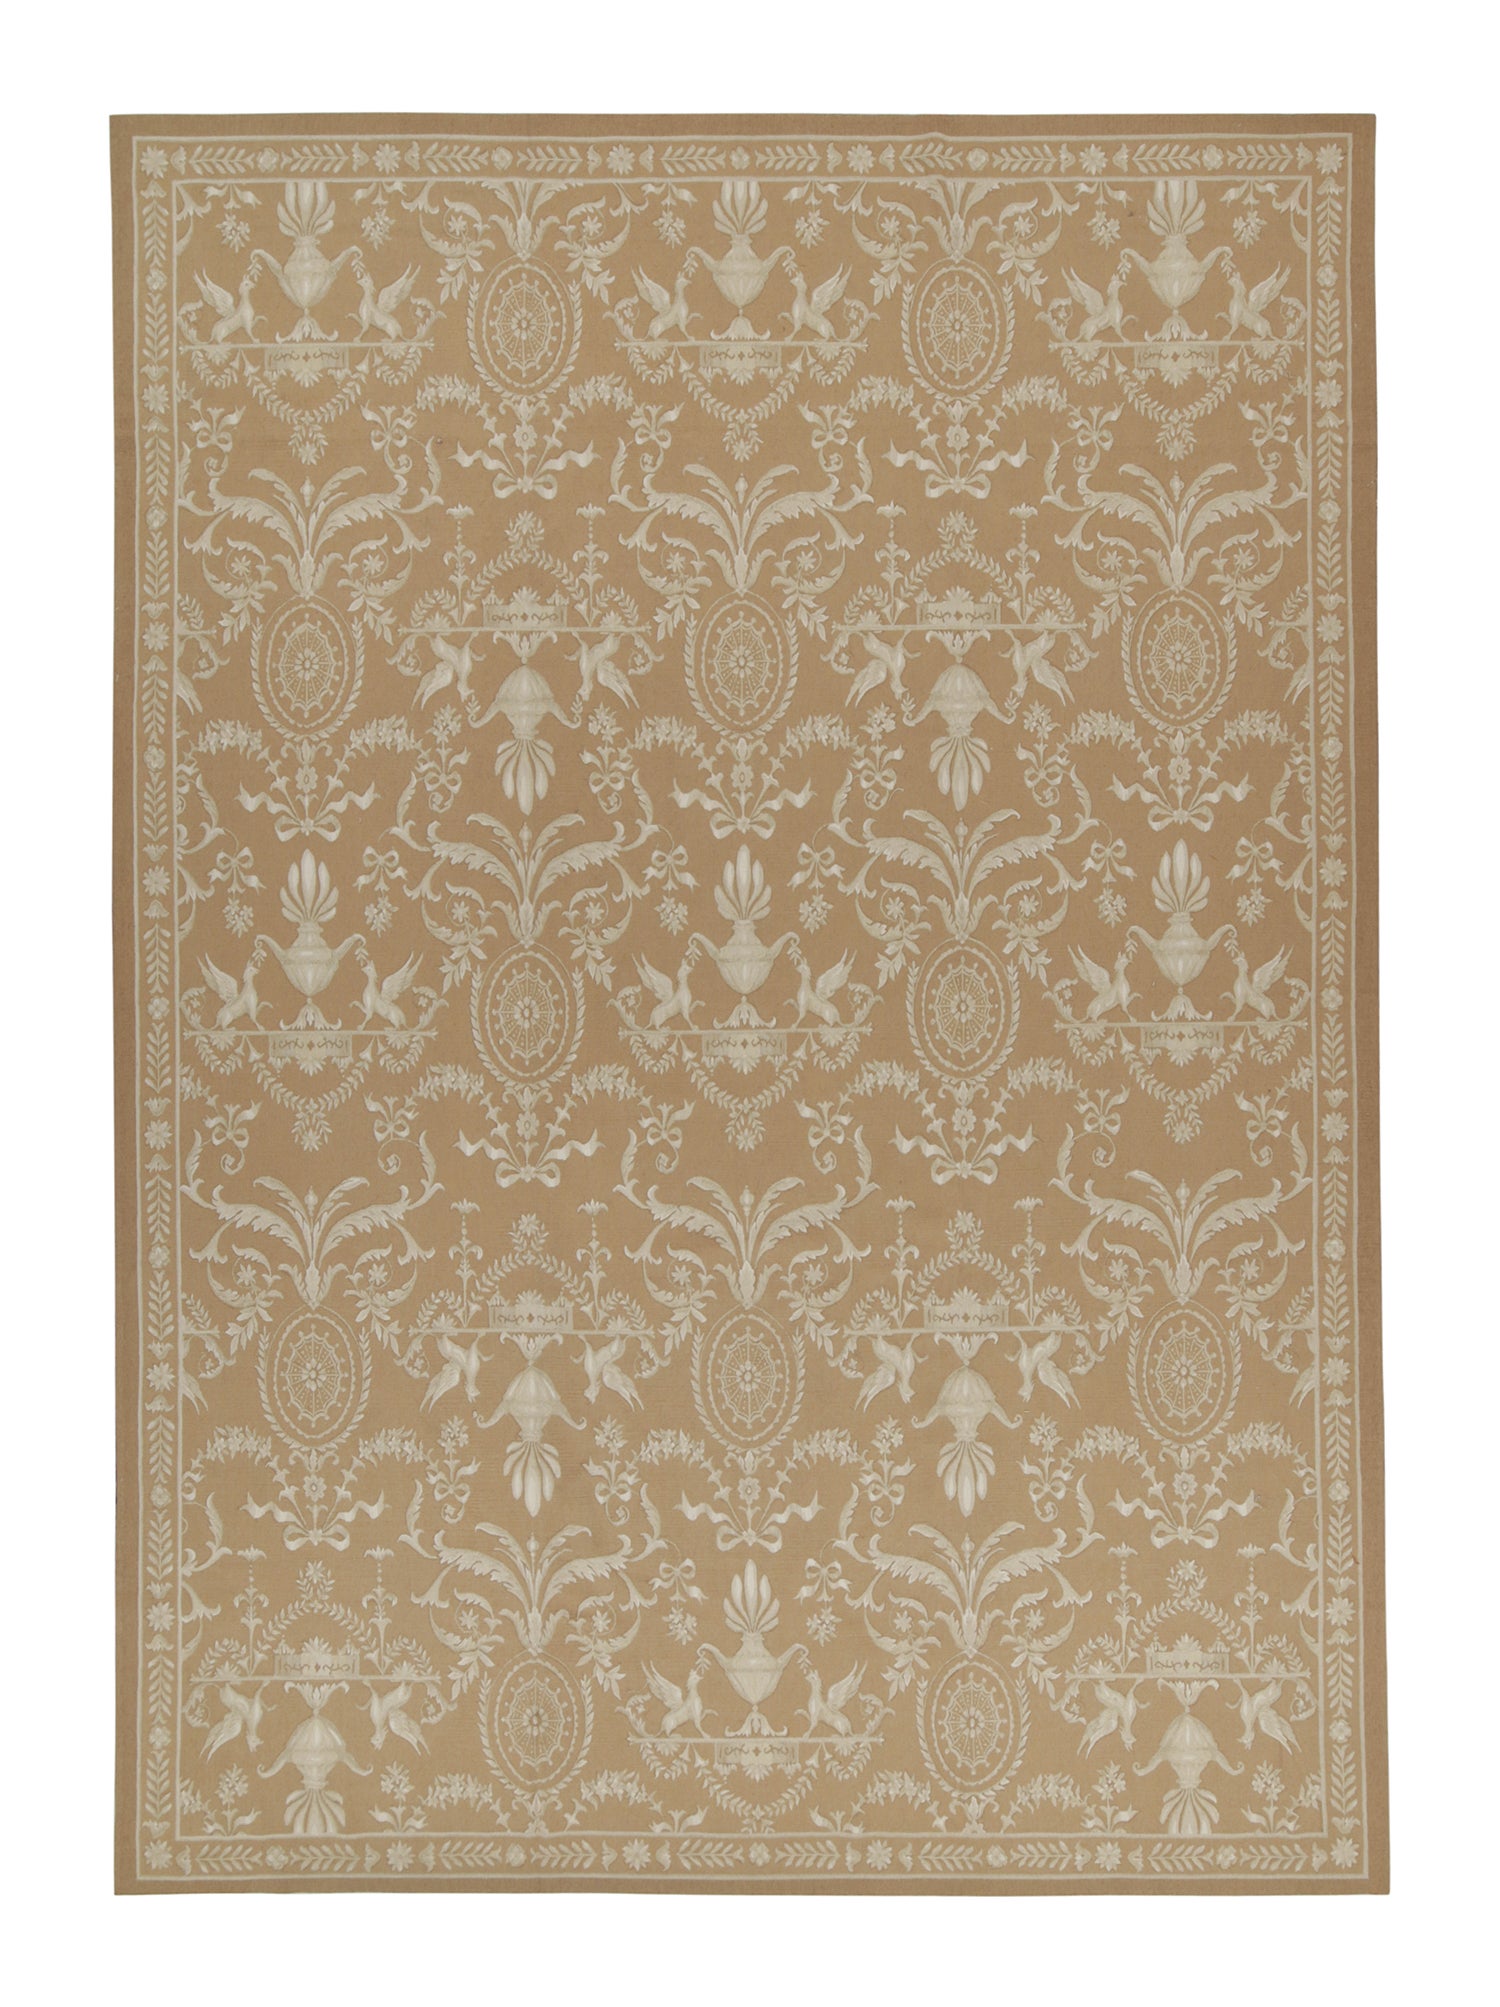 Rug & Kilim's 18th-Century Aubusson style Flat Weave in Brown with White Pattern (Tapis & Kilim's 18th-Century Aubusson style Flat Weave en brun avec motif blanc) en vente